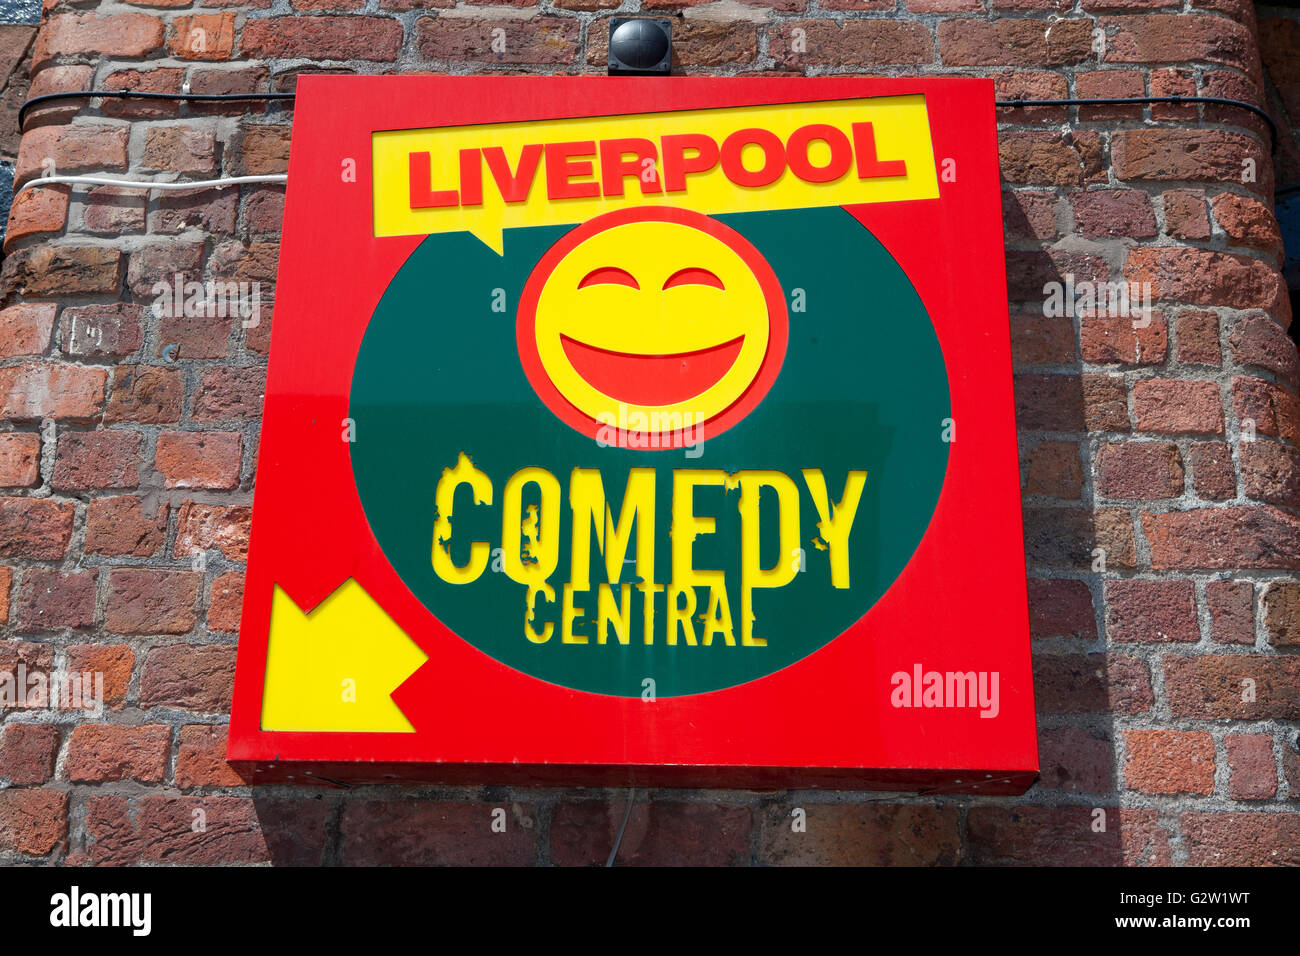 Liverpool Comedy Central Sign, Merseyside, UK Stock Photo